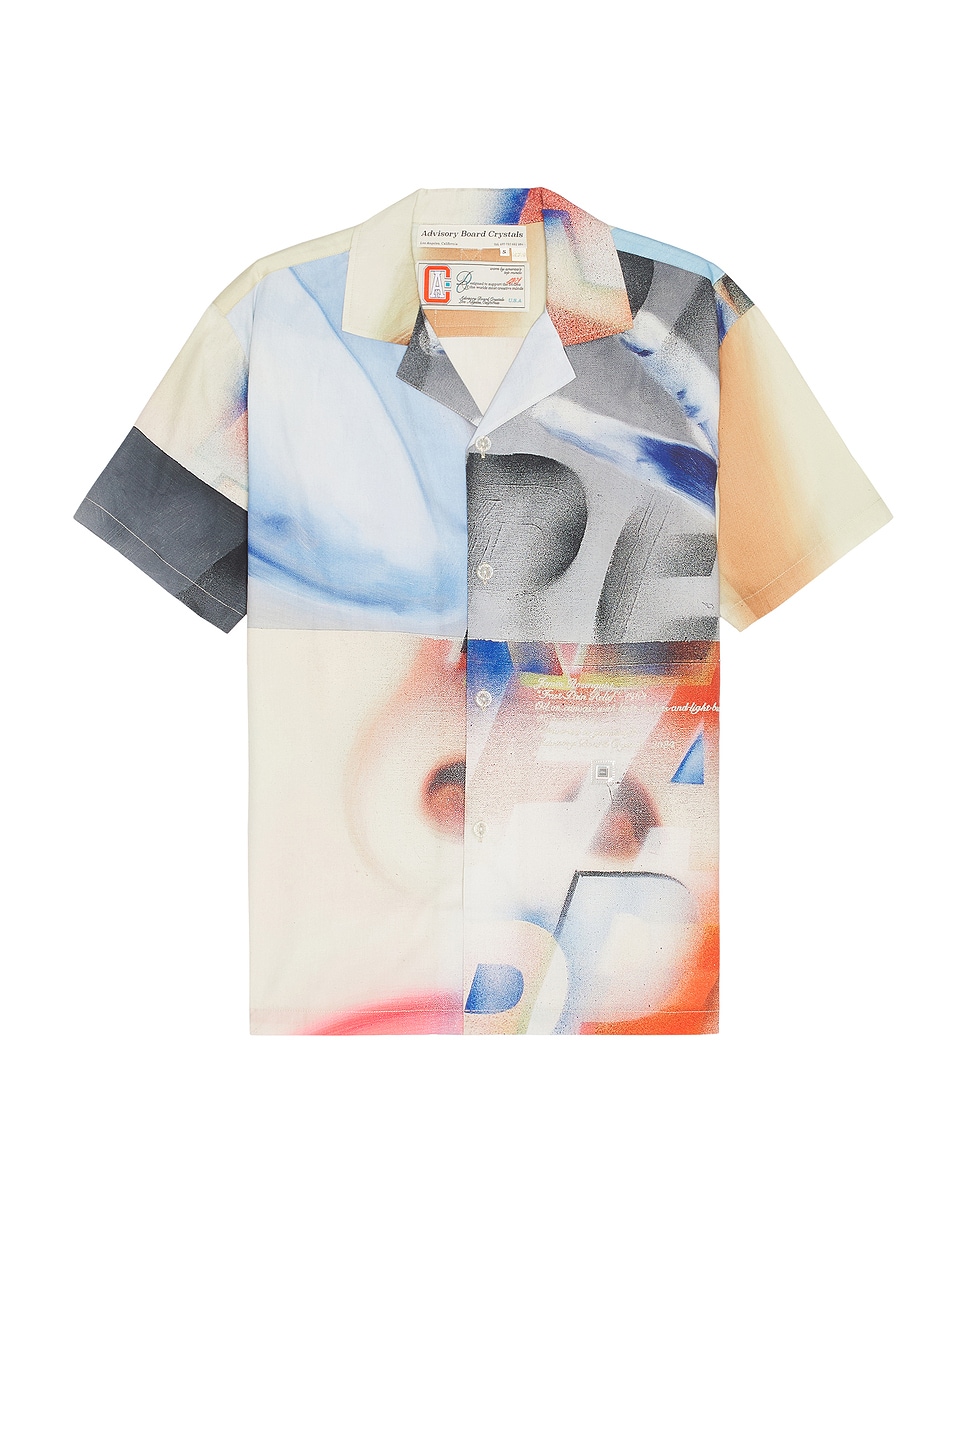 Image 1 of Advisory Board Crystals For James Rosenquist Foundation Art Shirt Fast Pain Relief in Print A - Fast Pain Relief